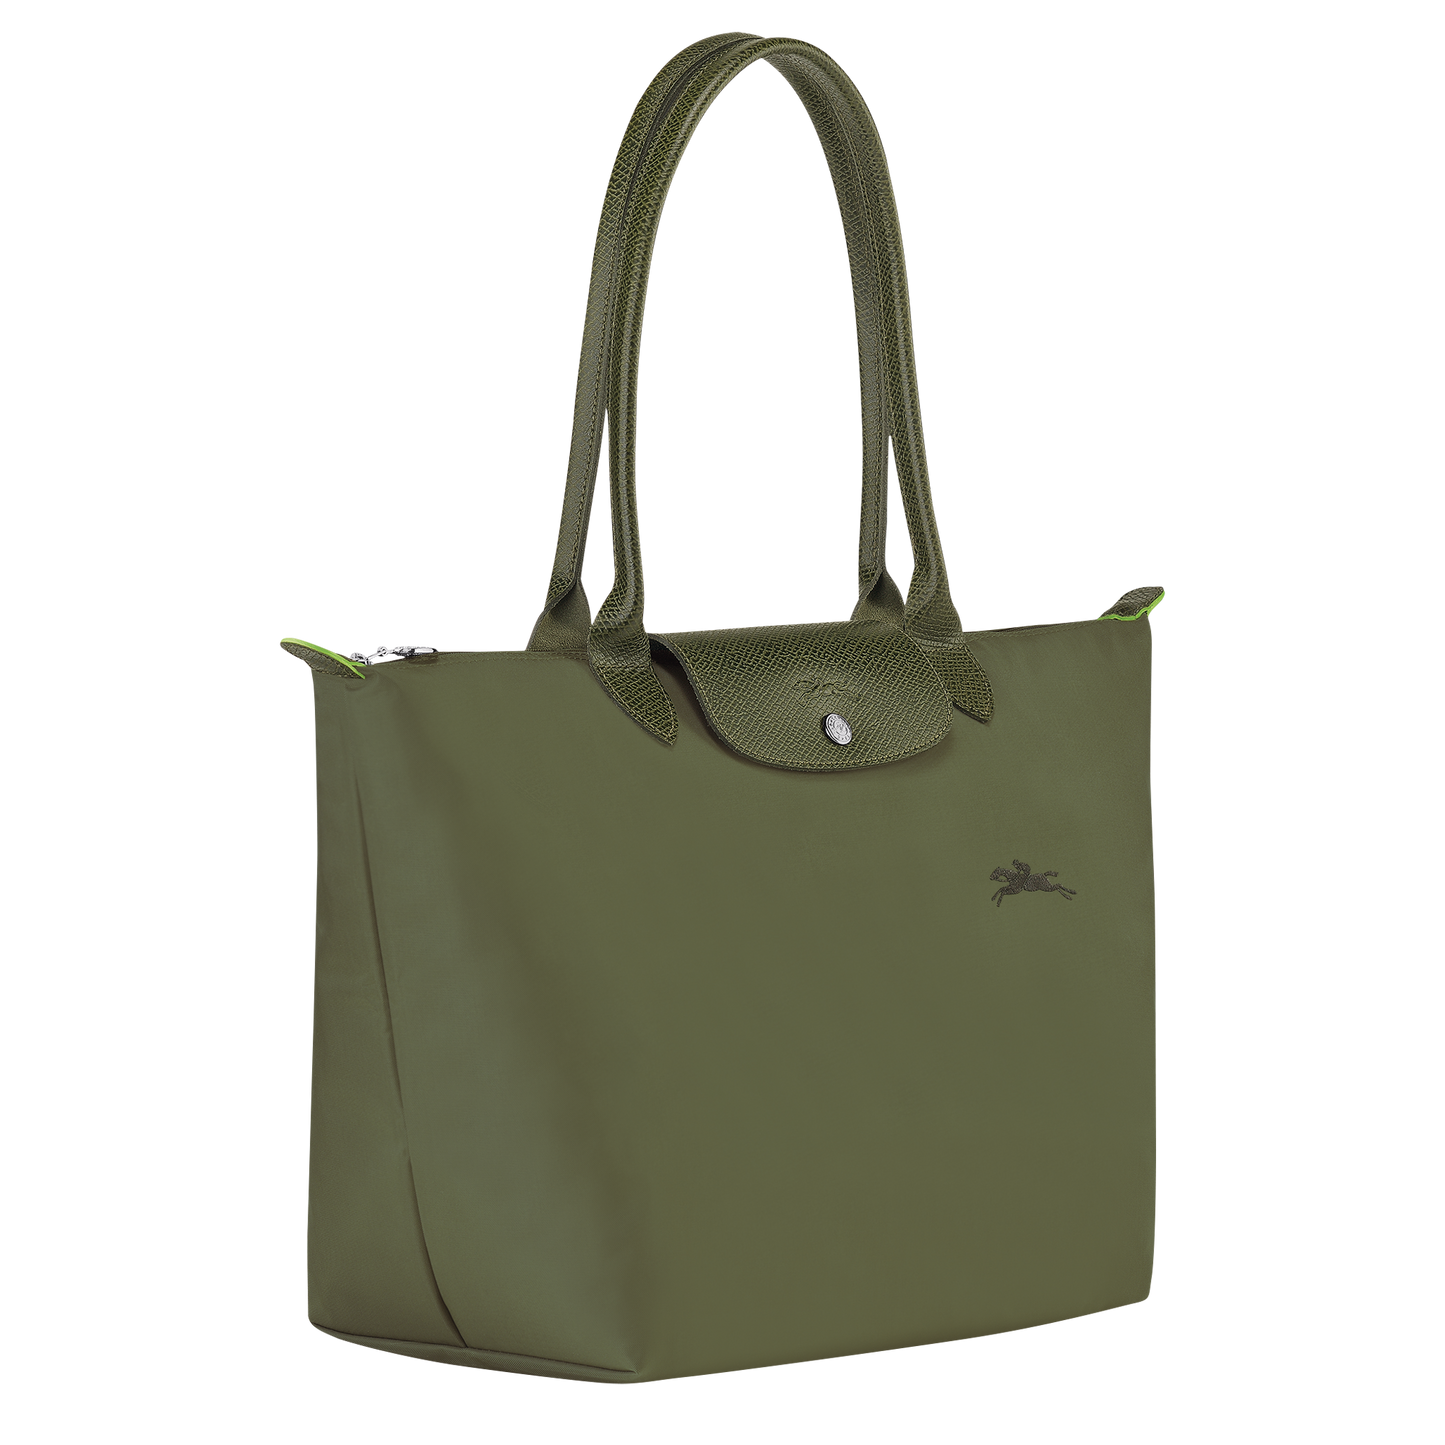 Longchamp LE PLIAGE GREEN - Tote bag L in Forest - 3 (SKU: L1899919479)